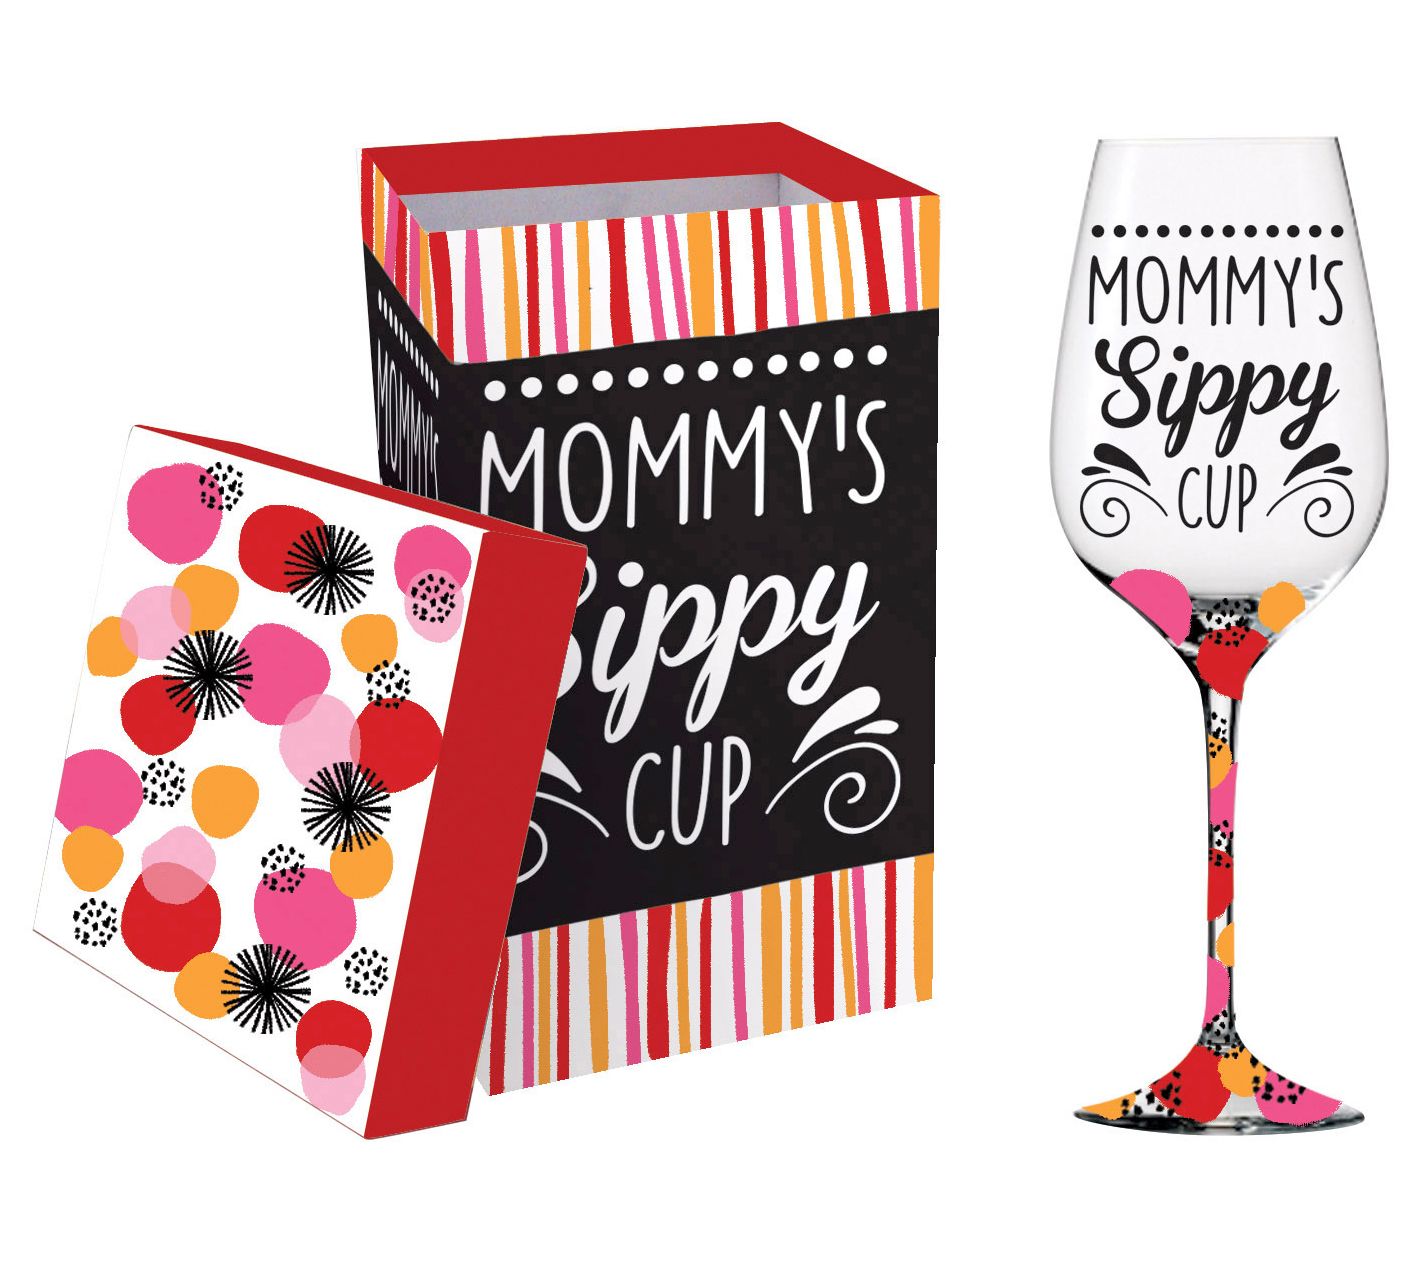 Mickey Mouse and Minnie Mouse Etched Wine Glasses, Pint Glasses, Stemless Wine  Glasses or Champagne Glasses. Dishwasher Safe. 